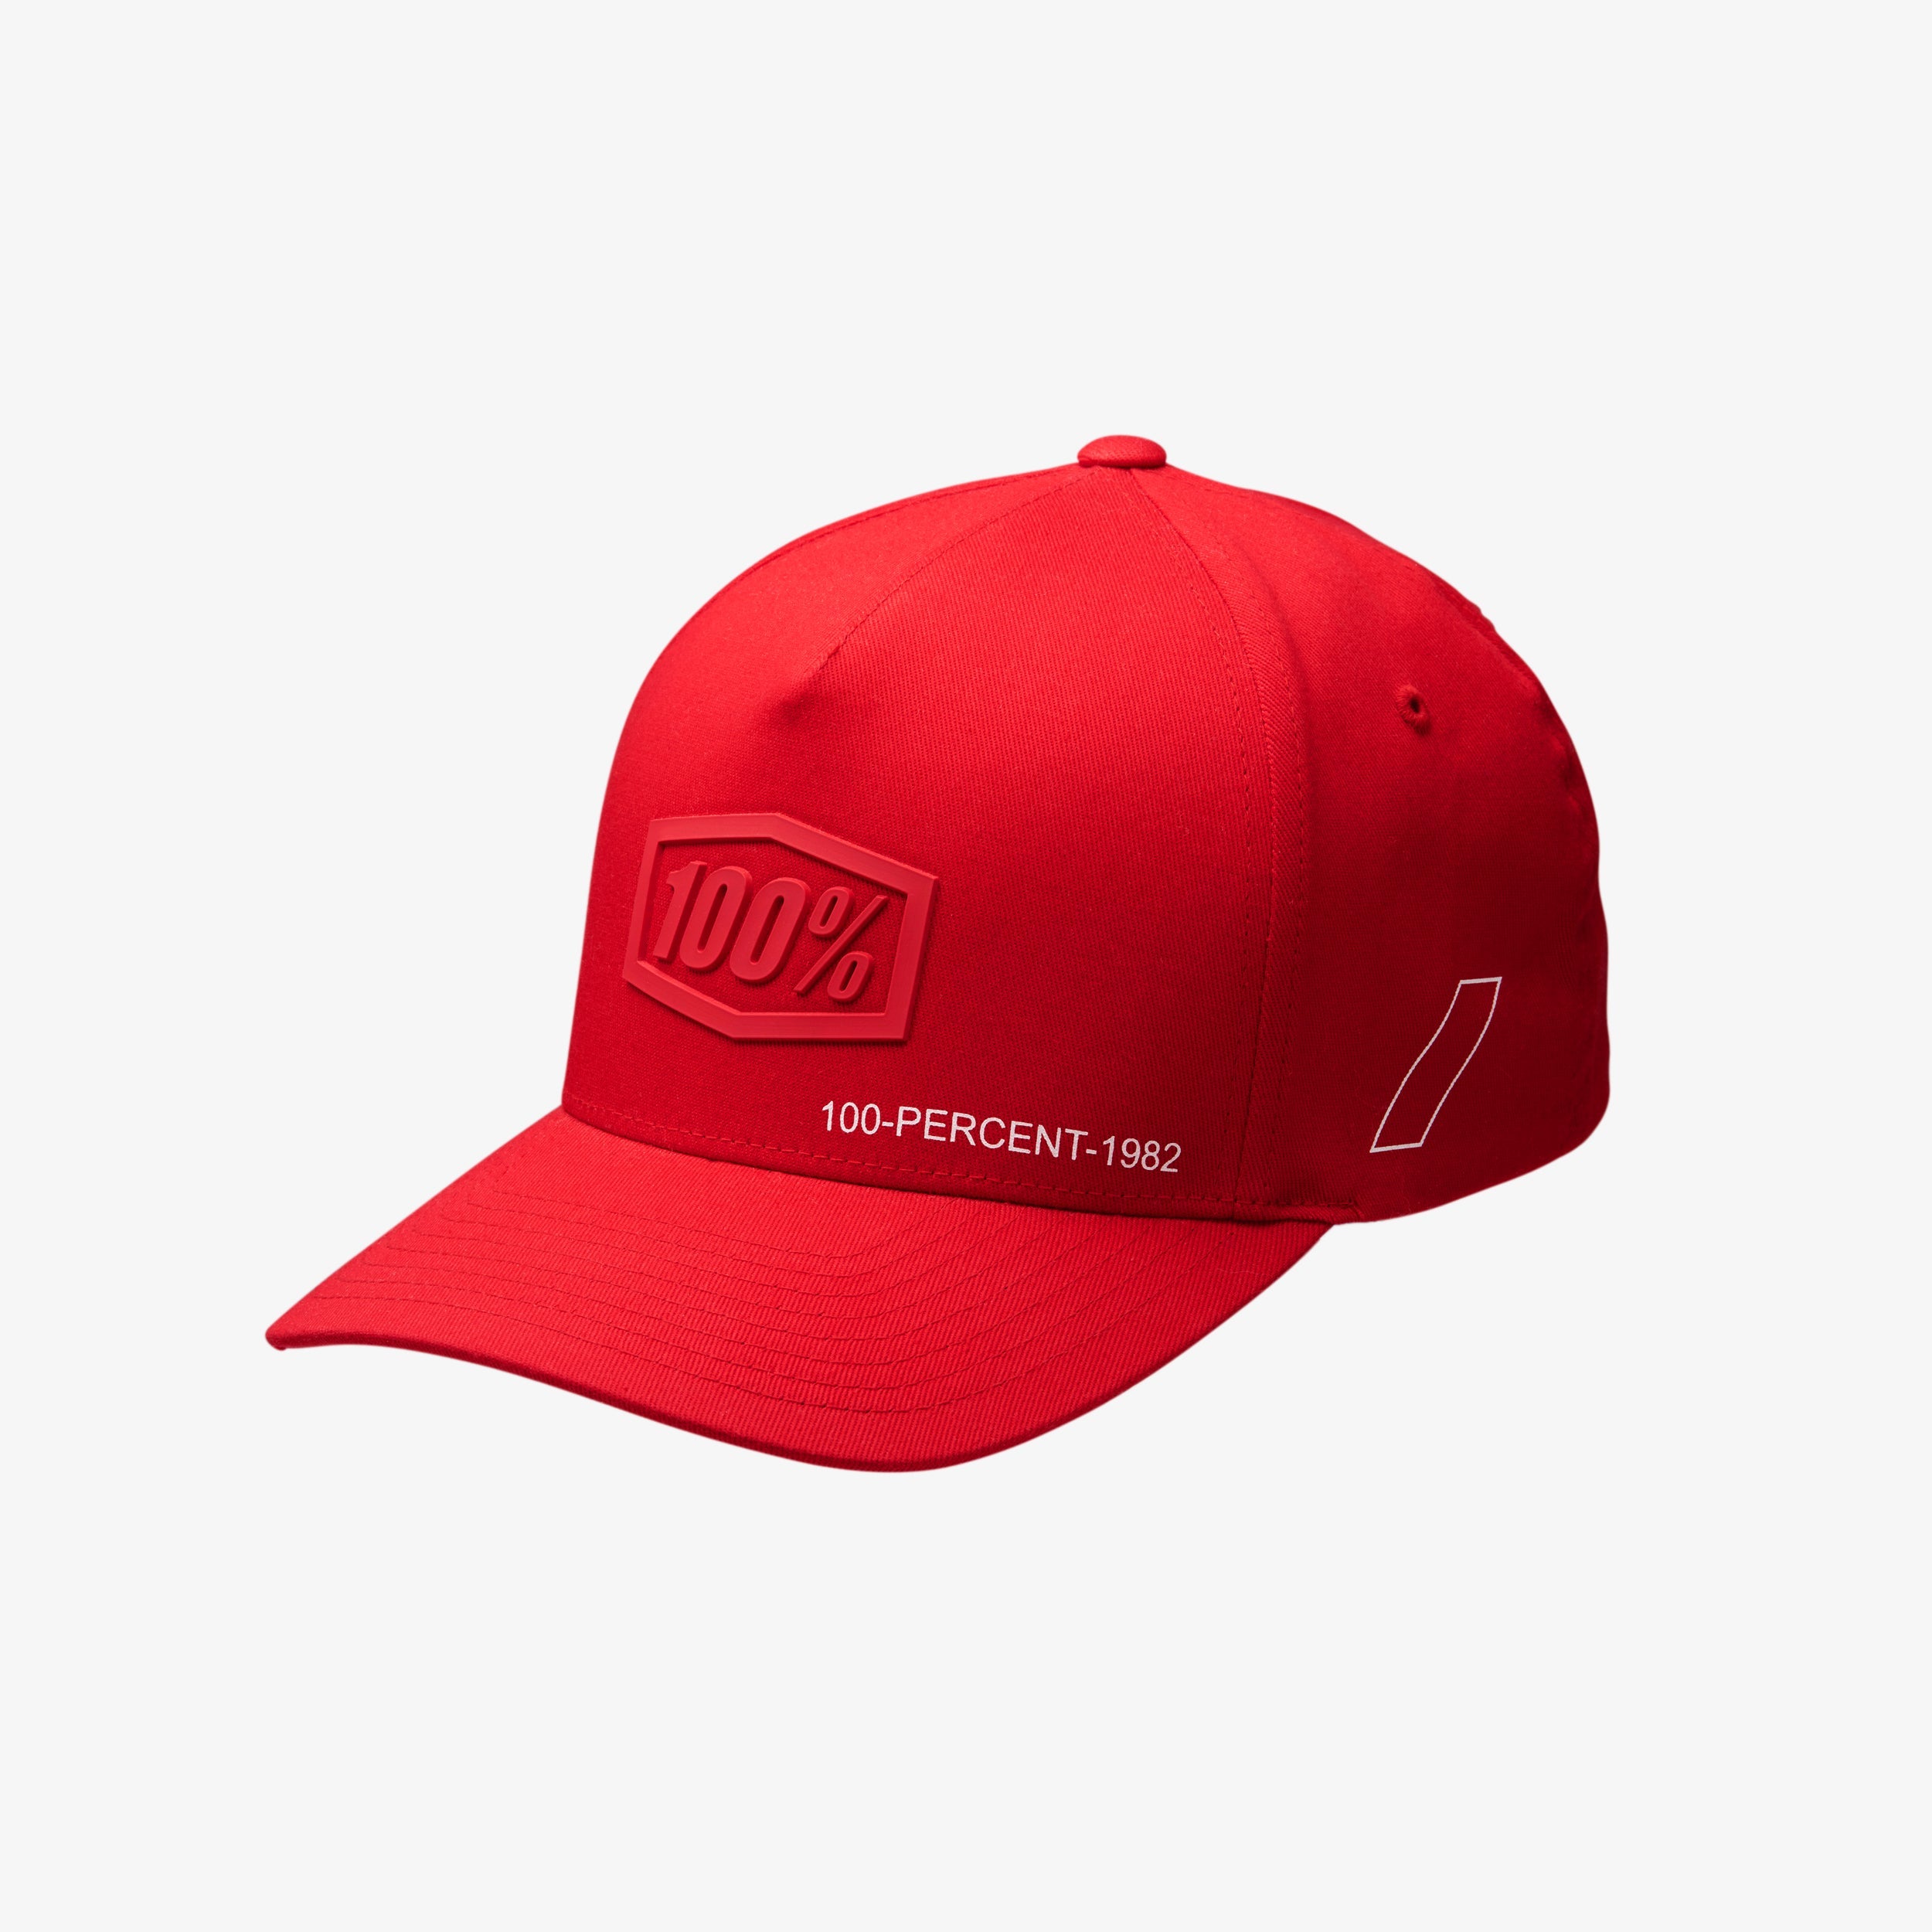 SHADOW Youth Snapback Cap LYP Fit Red